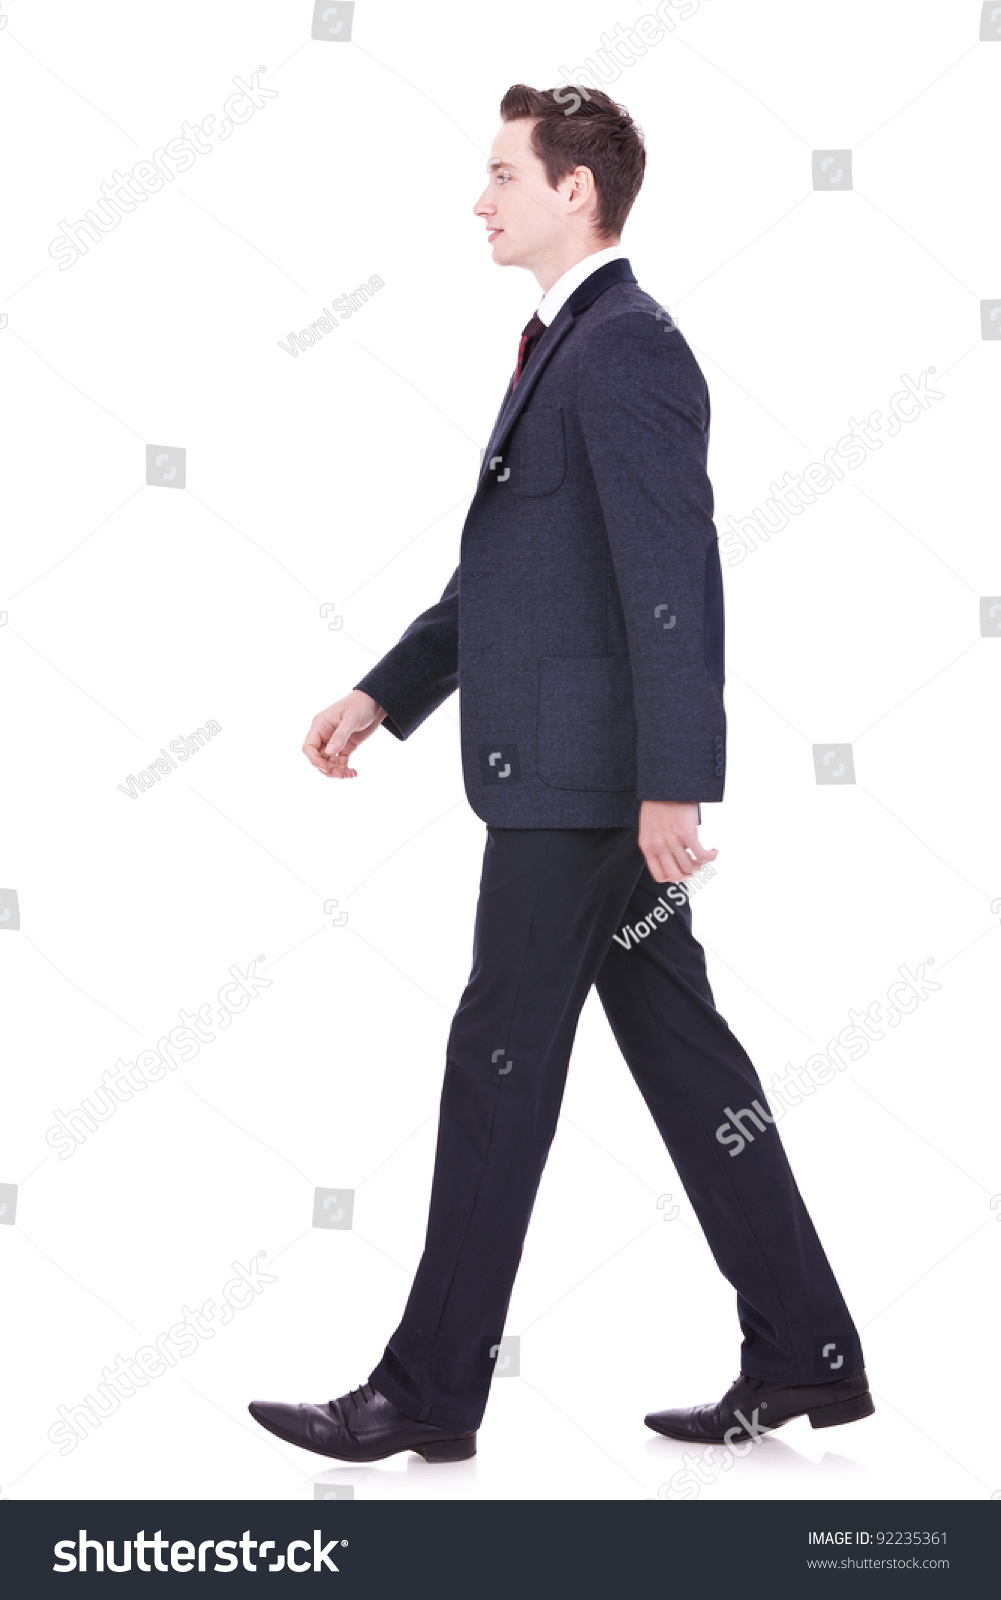 stock-photo-picture-of-a-young-business-man-walking-forward-side-view-92235361.jpg